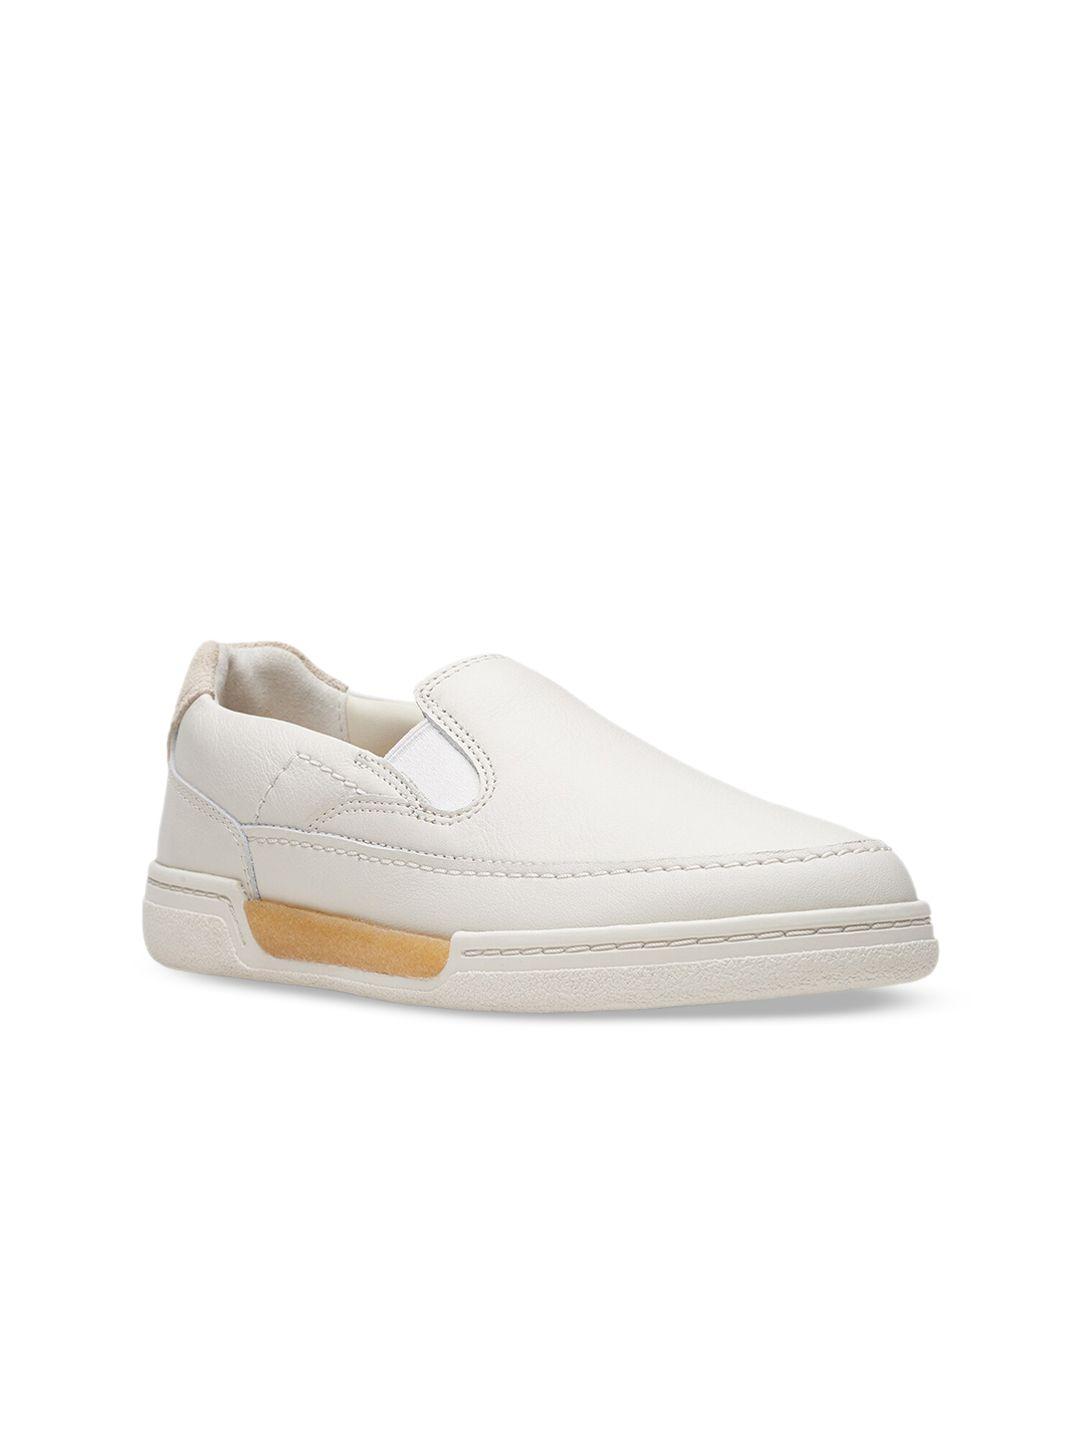 clarks women textured leather slip-on sneakers